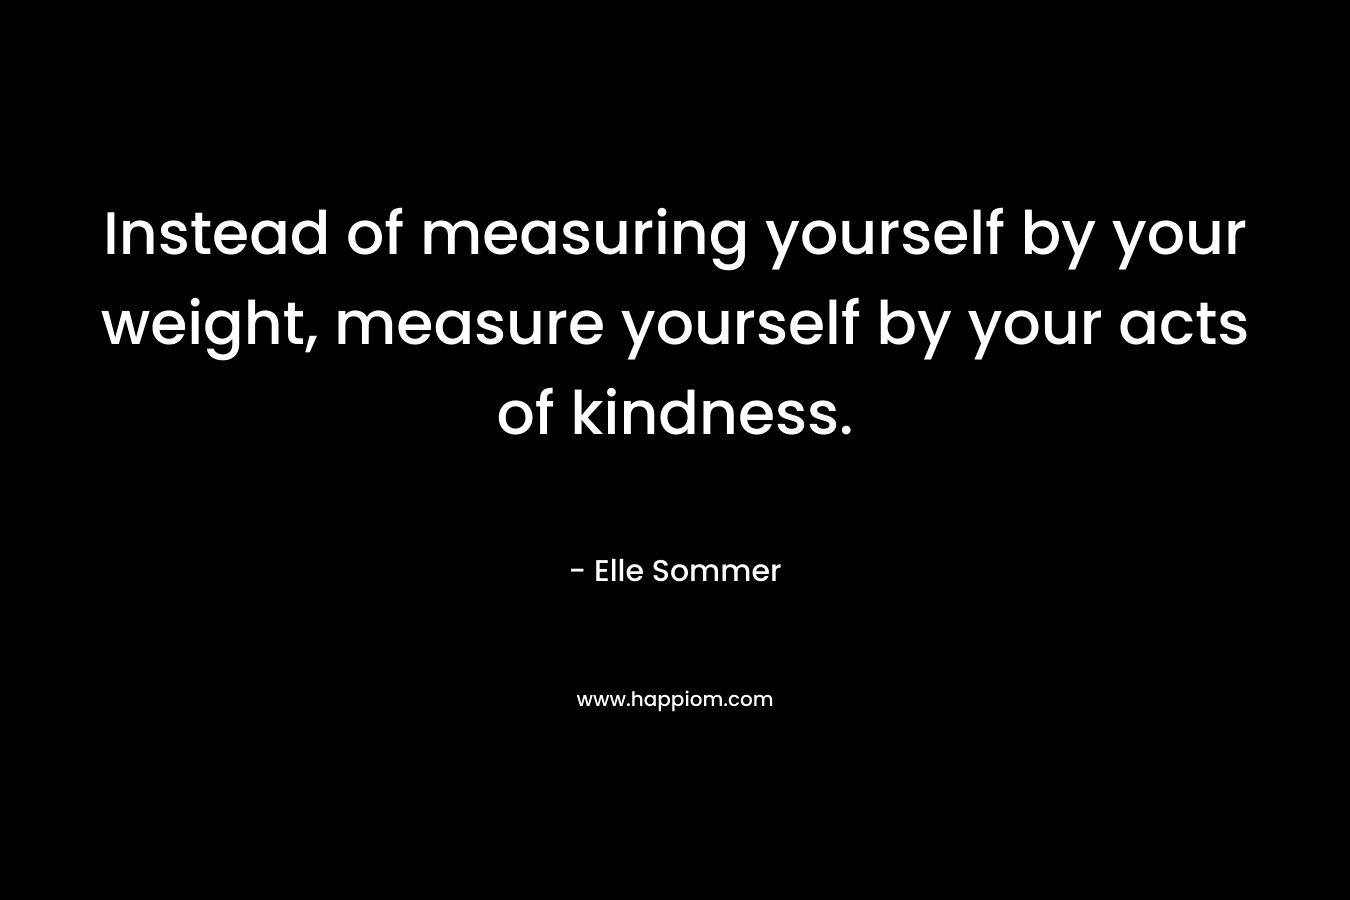 Instead of measuring yourself by your weight, measure yourself by your acts of kindness.